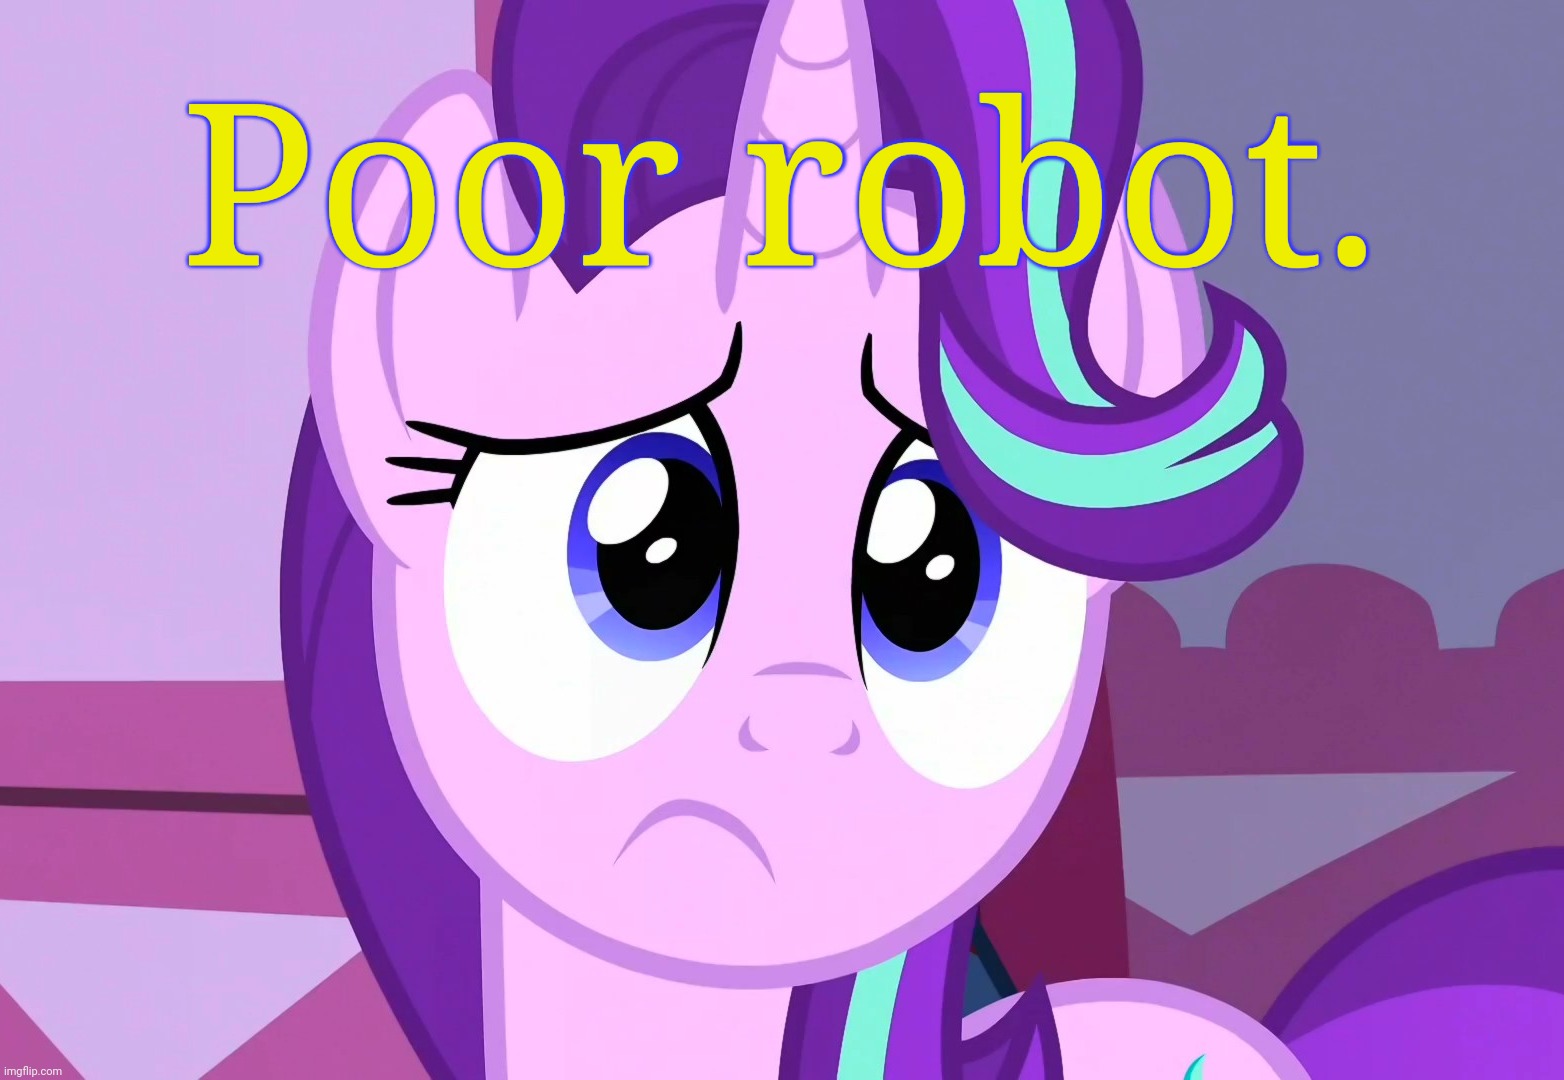 Sadlight Glimmer (MLP) | Poor robot. | image tagged in sadlight glimmer mlp | made w/ Imgflip meme maker